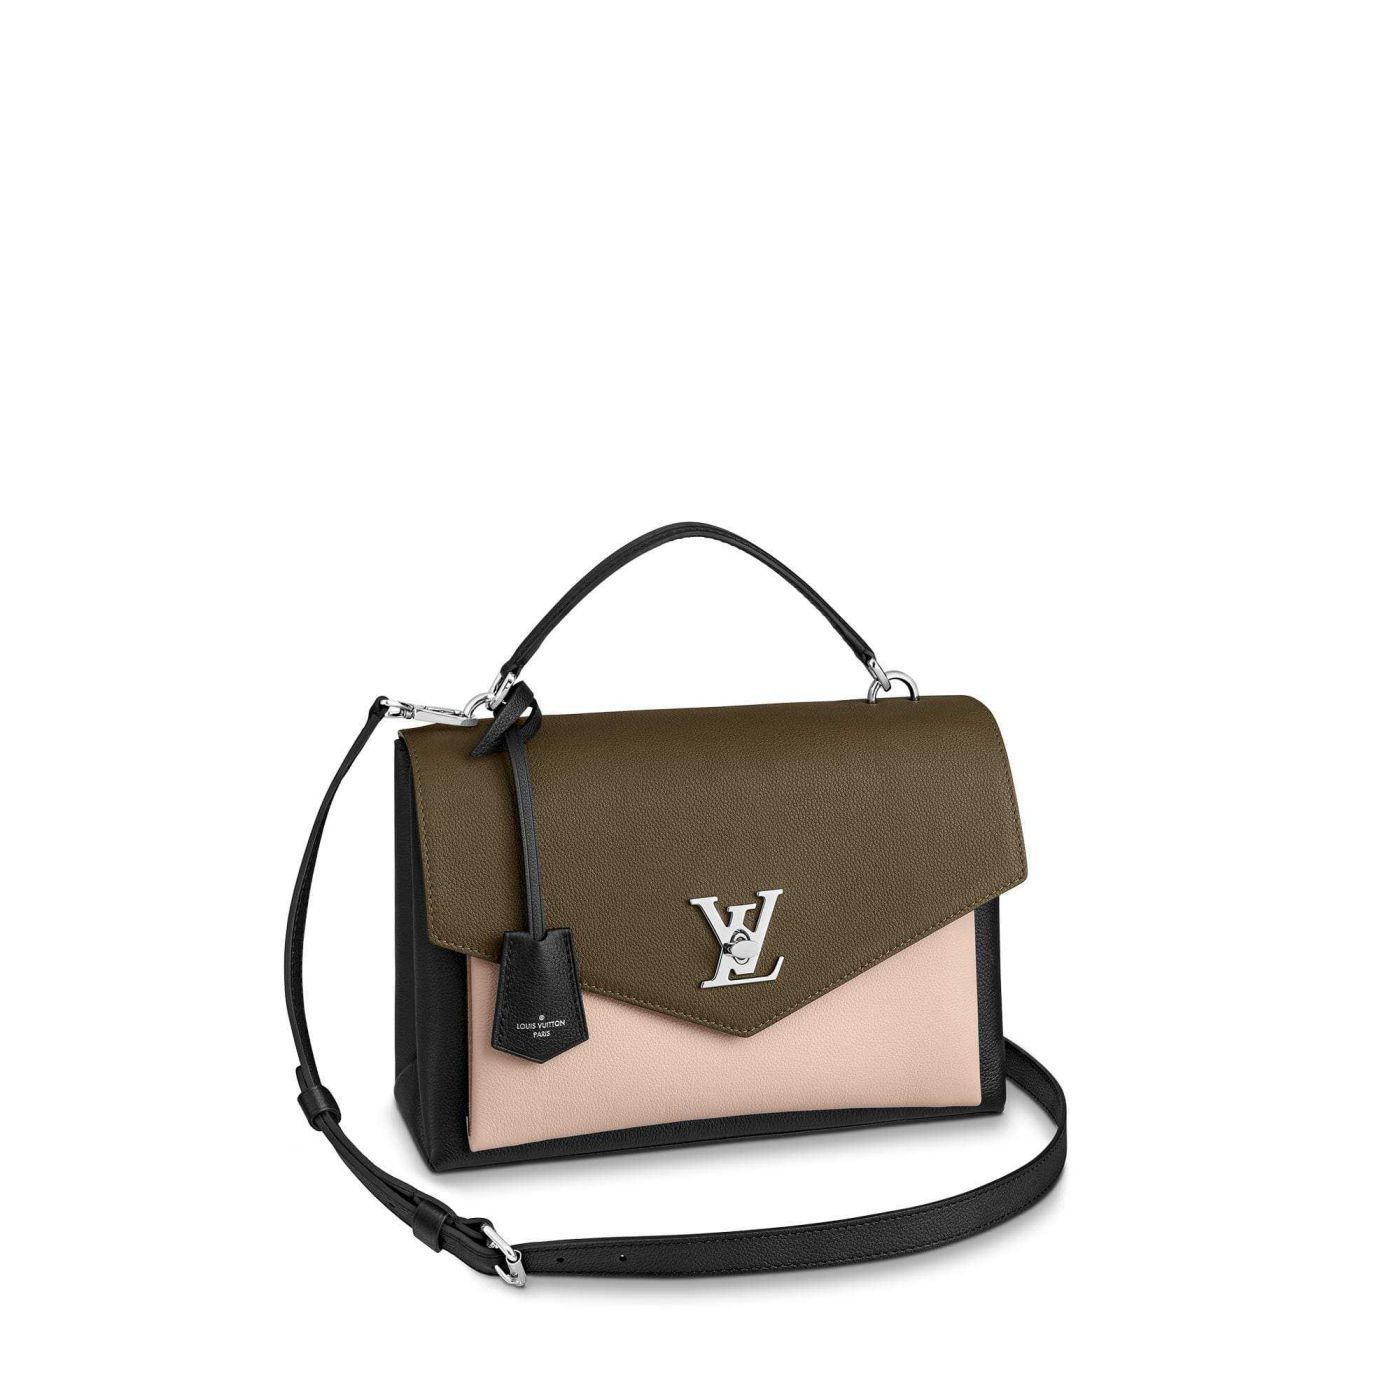 LV M55323 Leather MYLOCKME Women Tote Bags